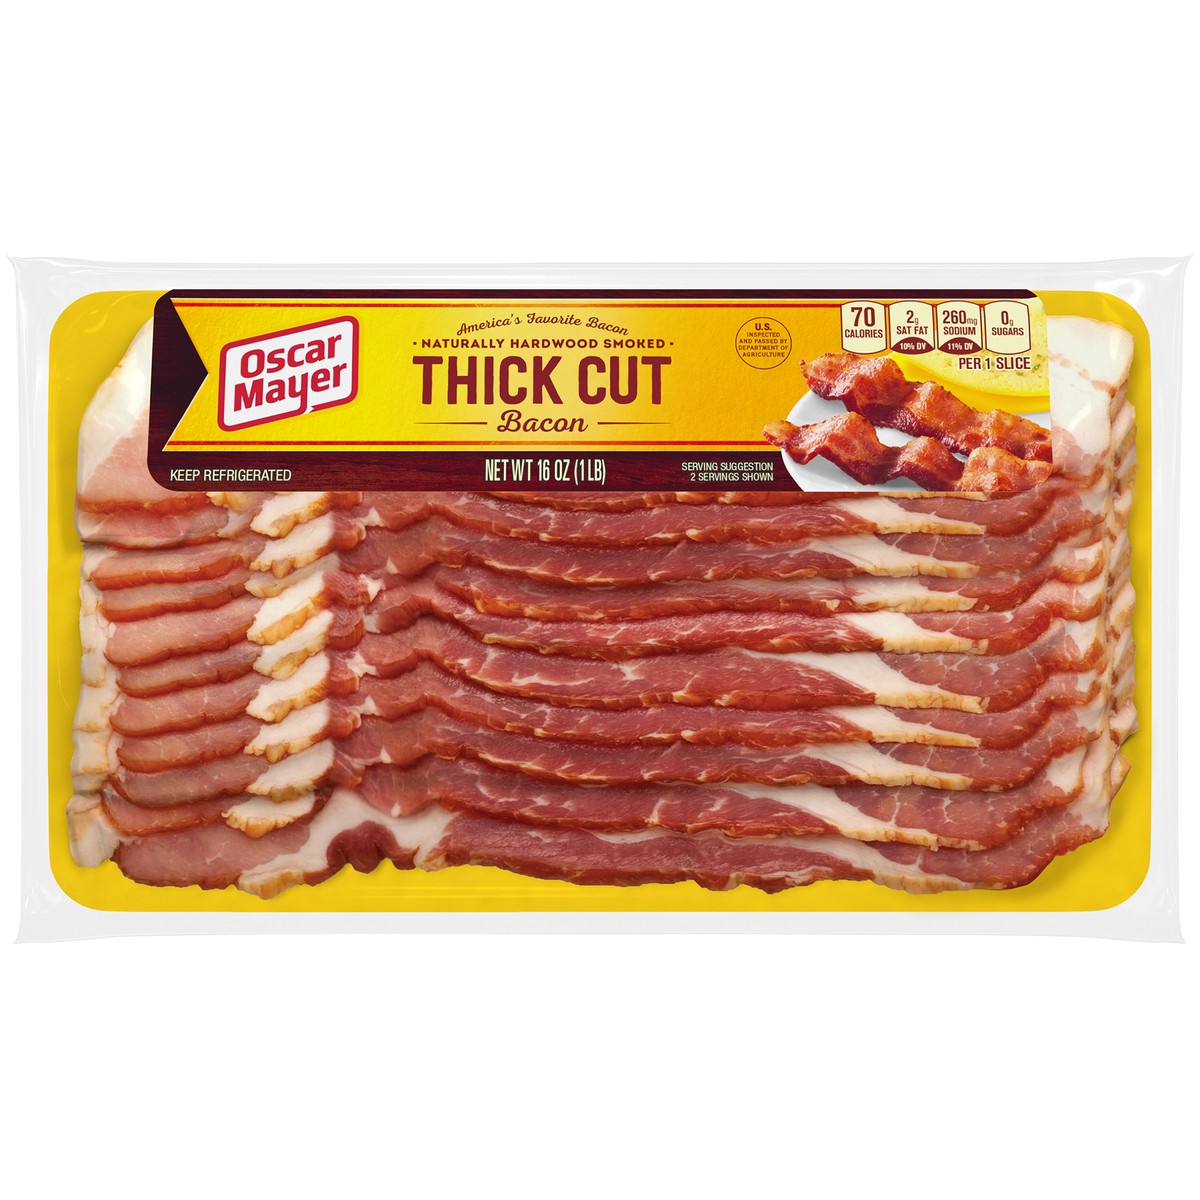 slide 1 of 15, Oscar Mayer Naturally Hardwood Smoked Thick Cut Bacon, 16 oz Pack, 11-13 slices, 16 oz